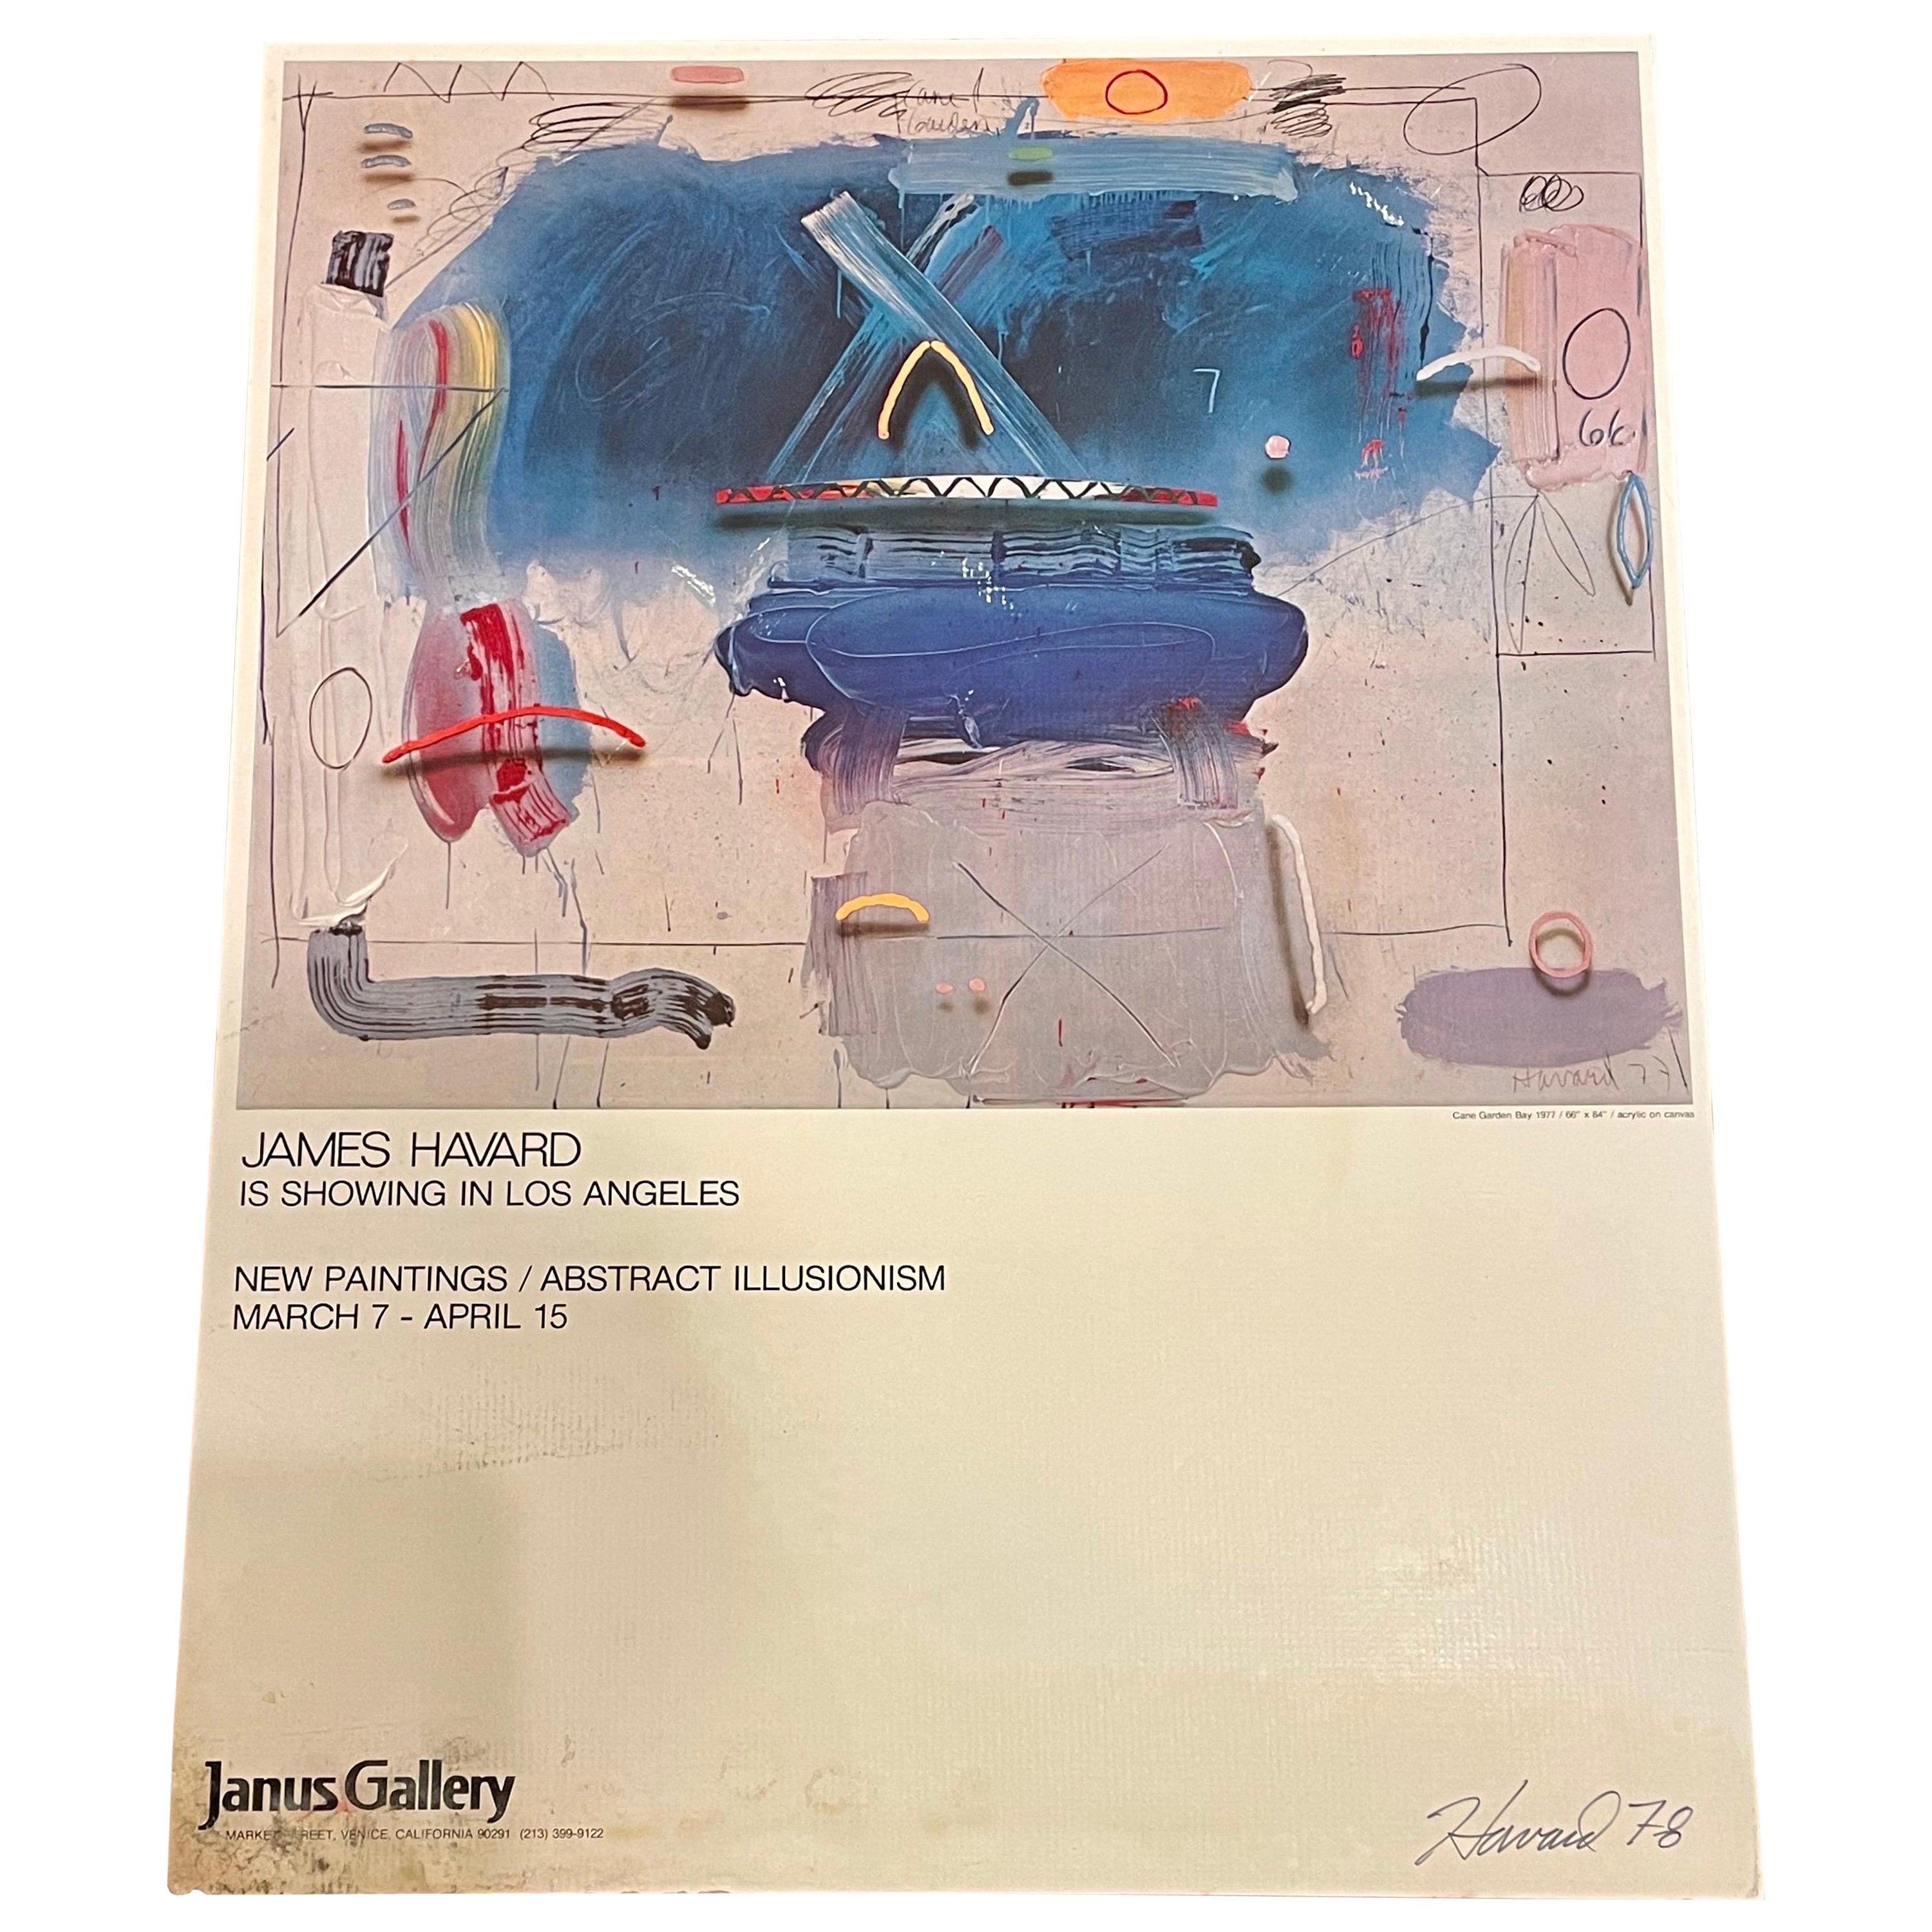 Original Exhibition Rare Janus Gallery Poster Signed & Dated by James Havard